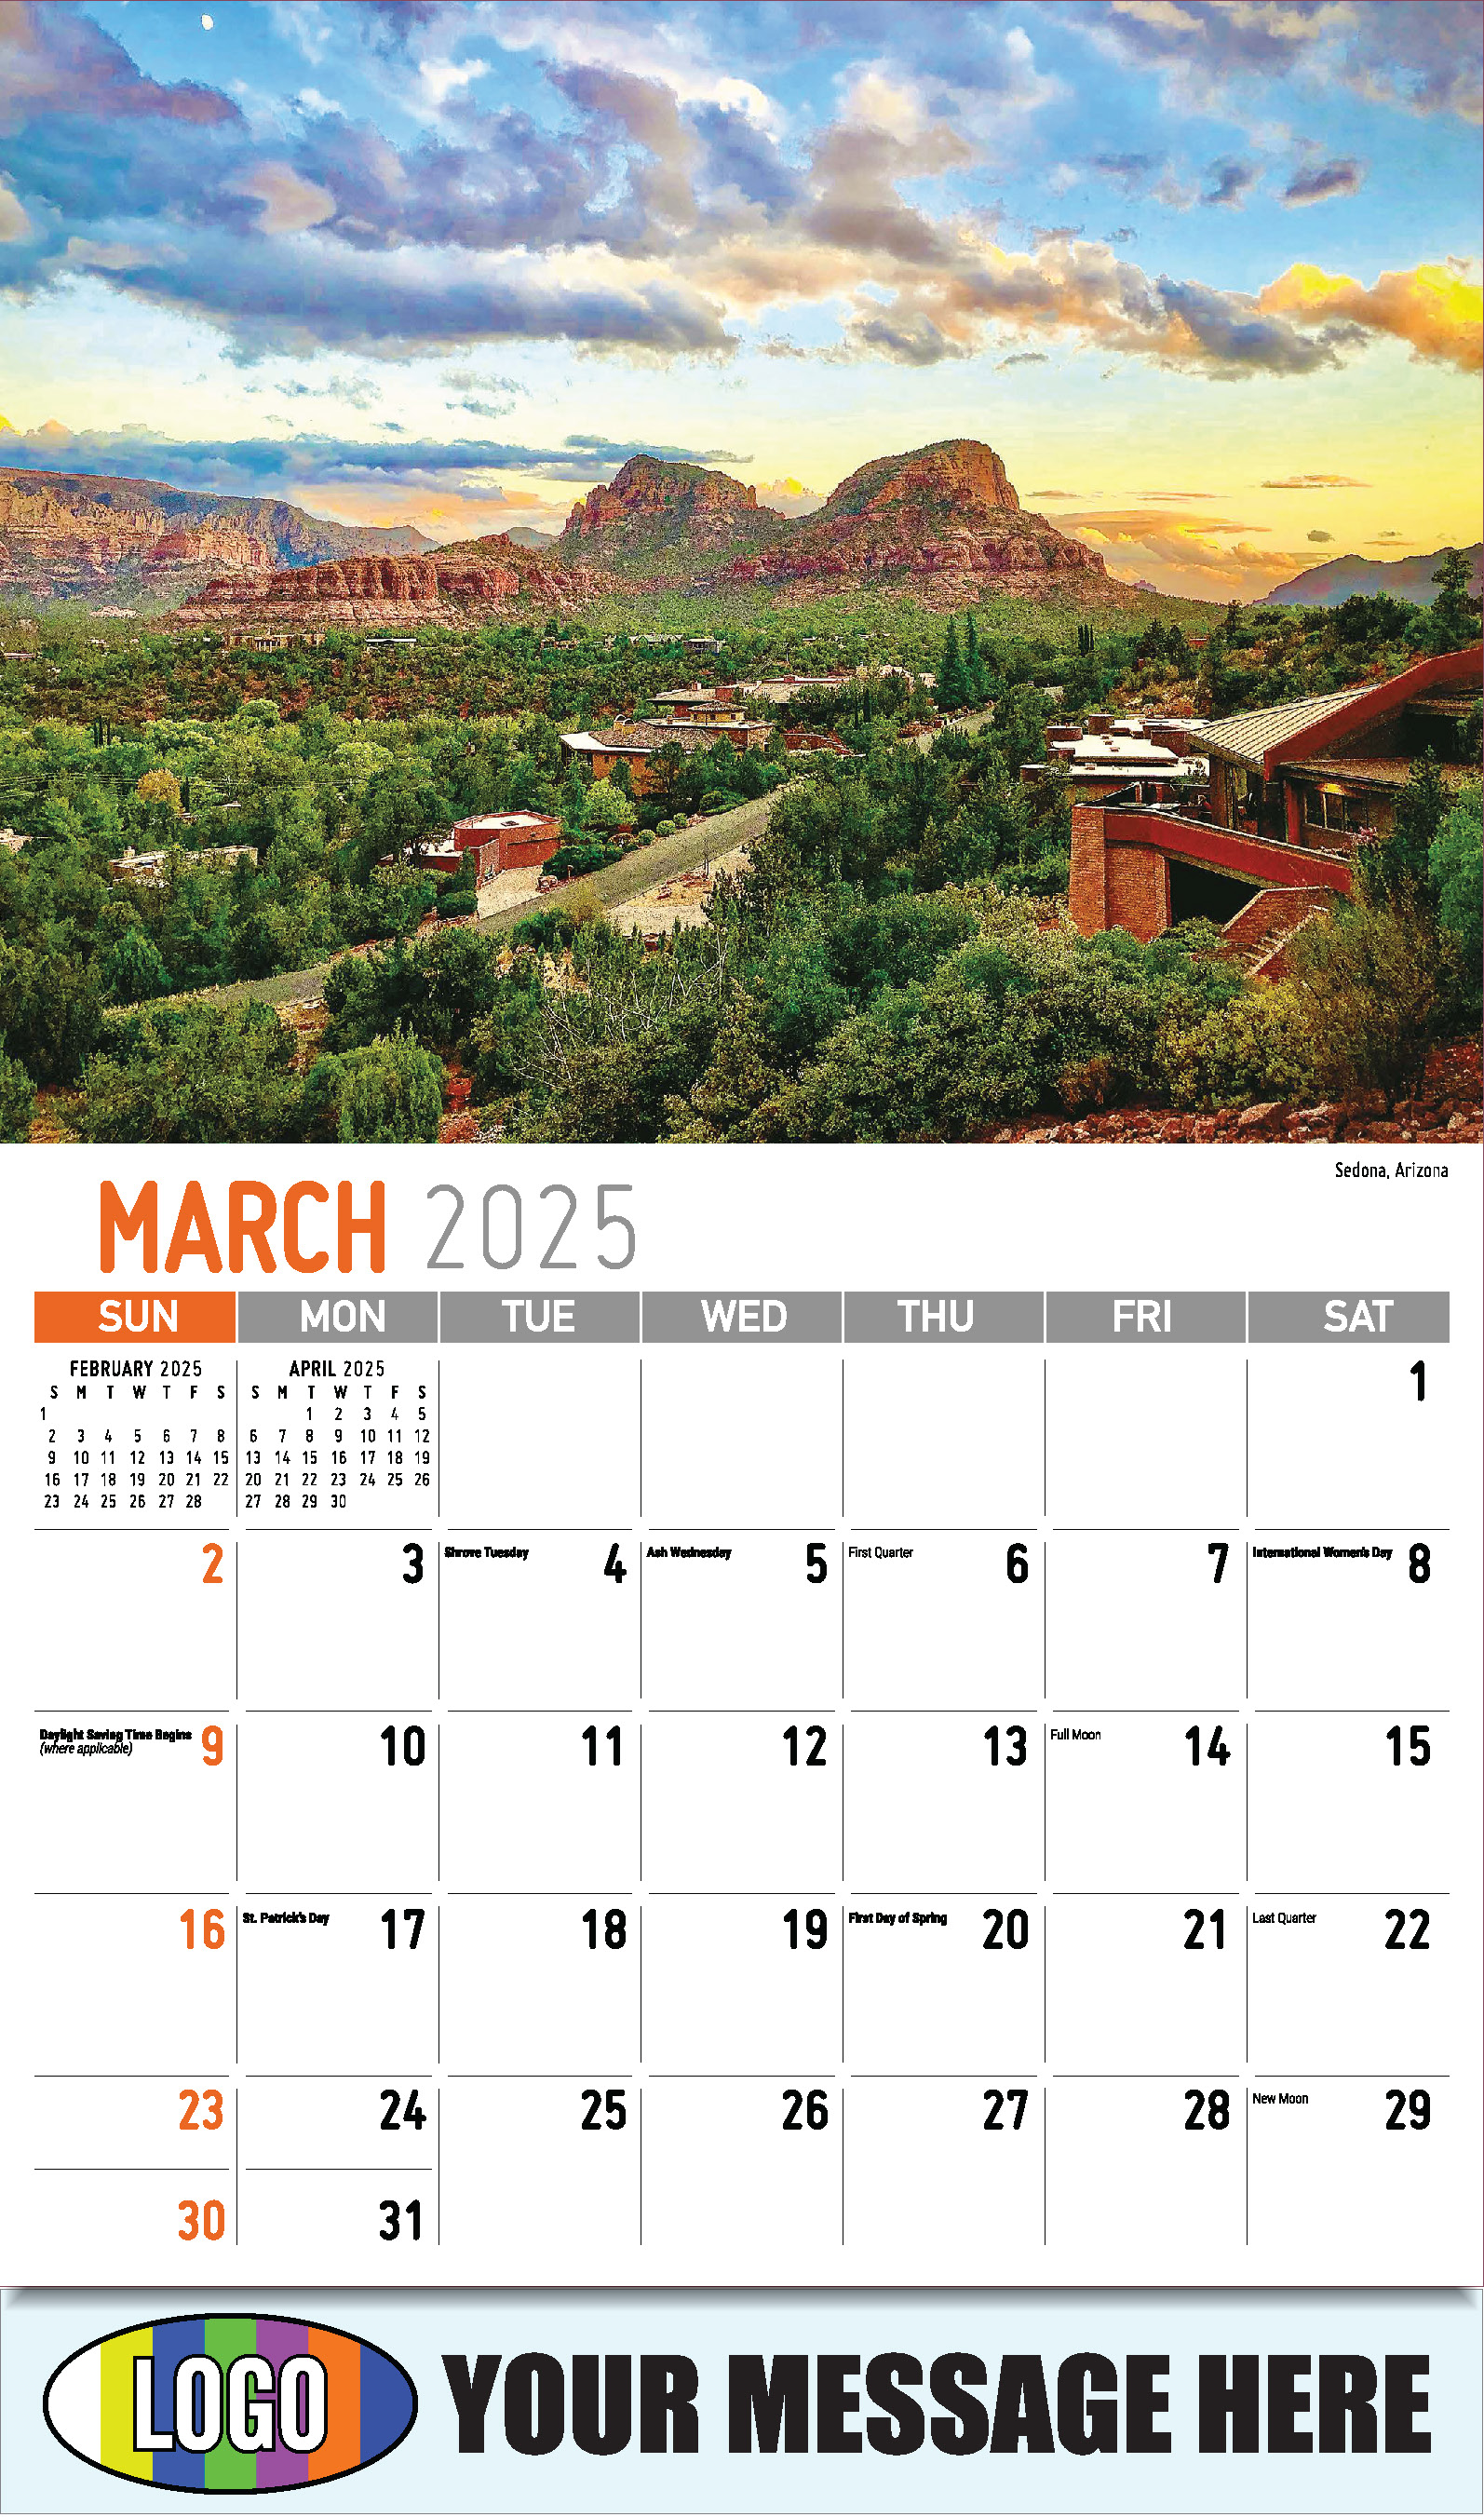 Scenes of America 2025 Business Advertising Wall Calendar - March